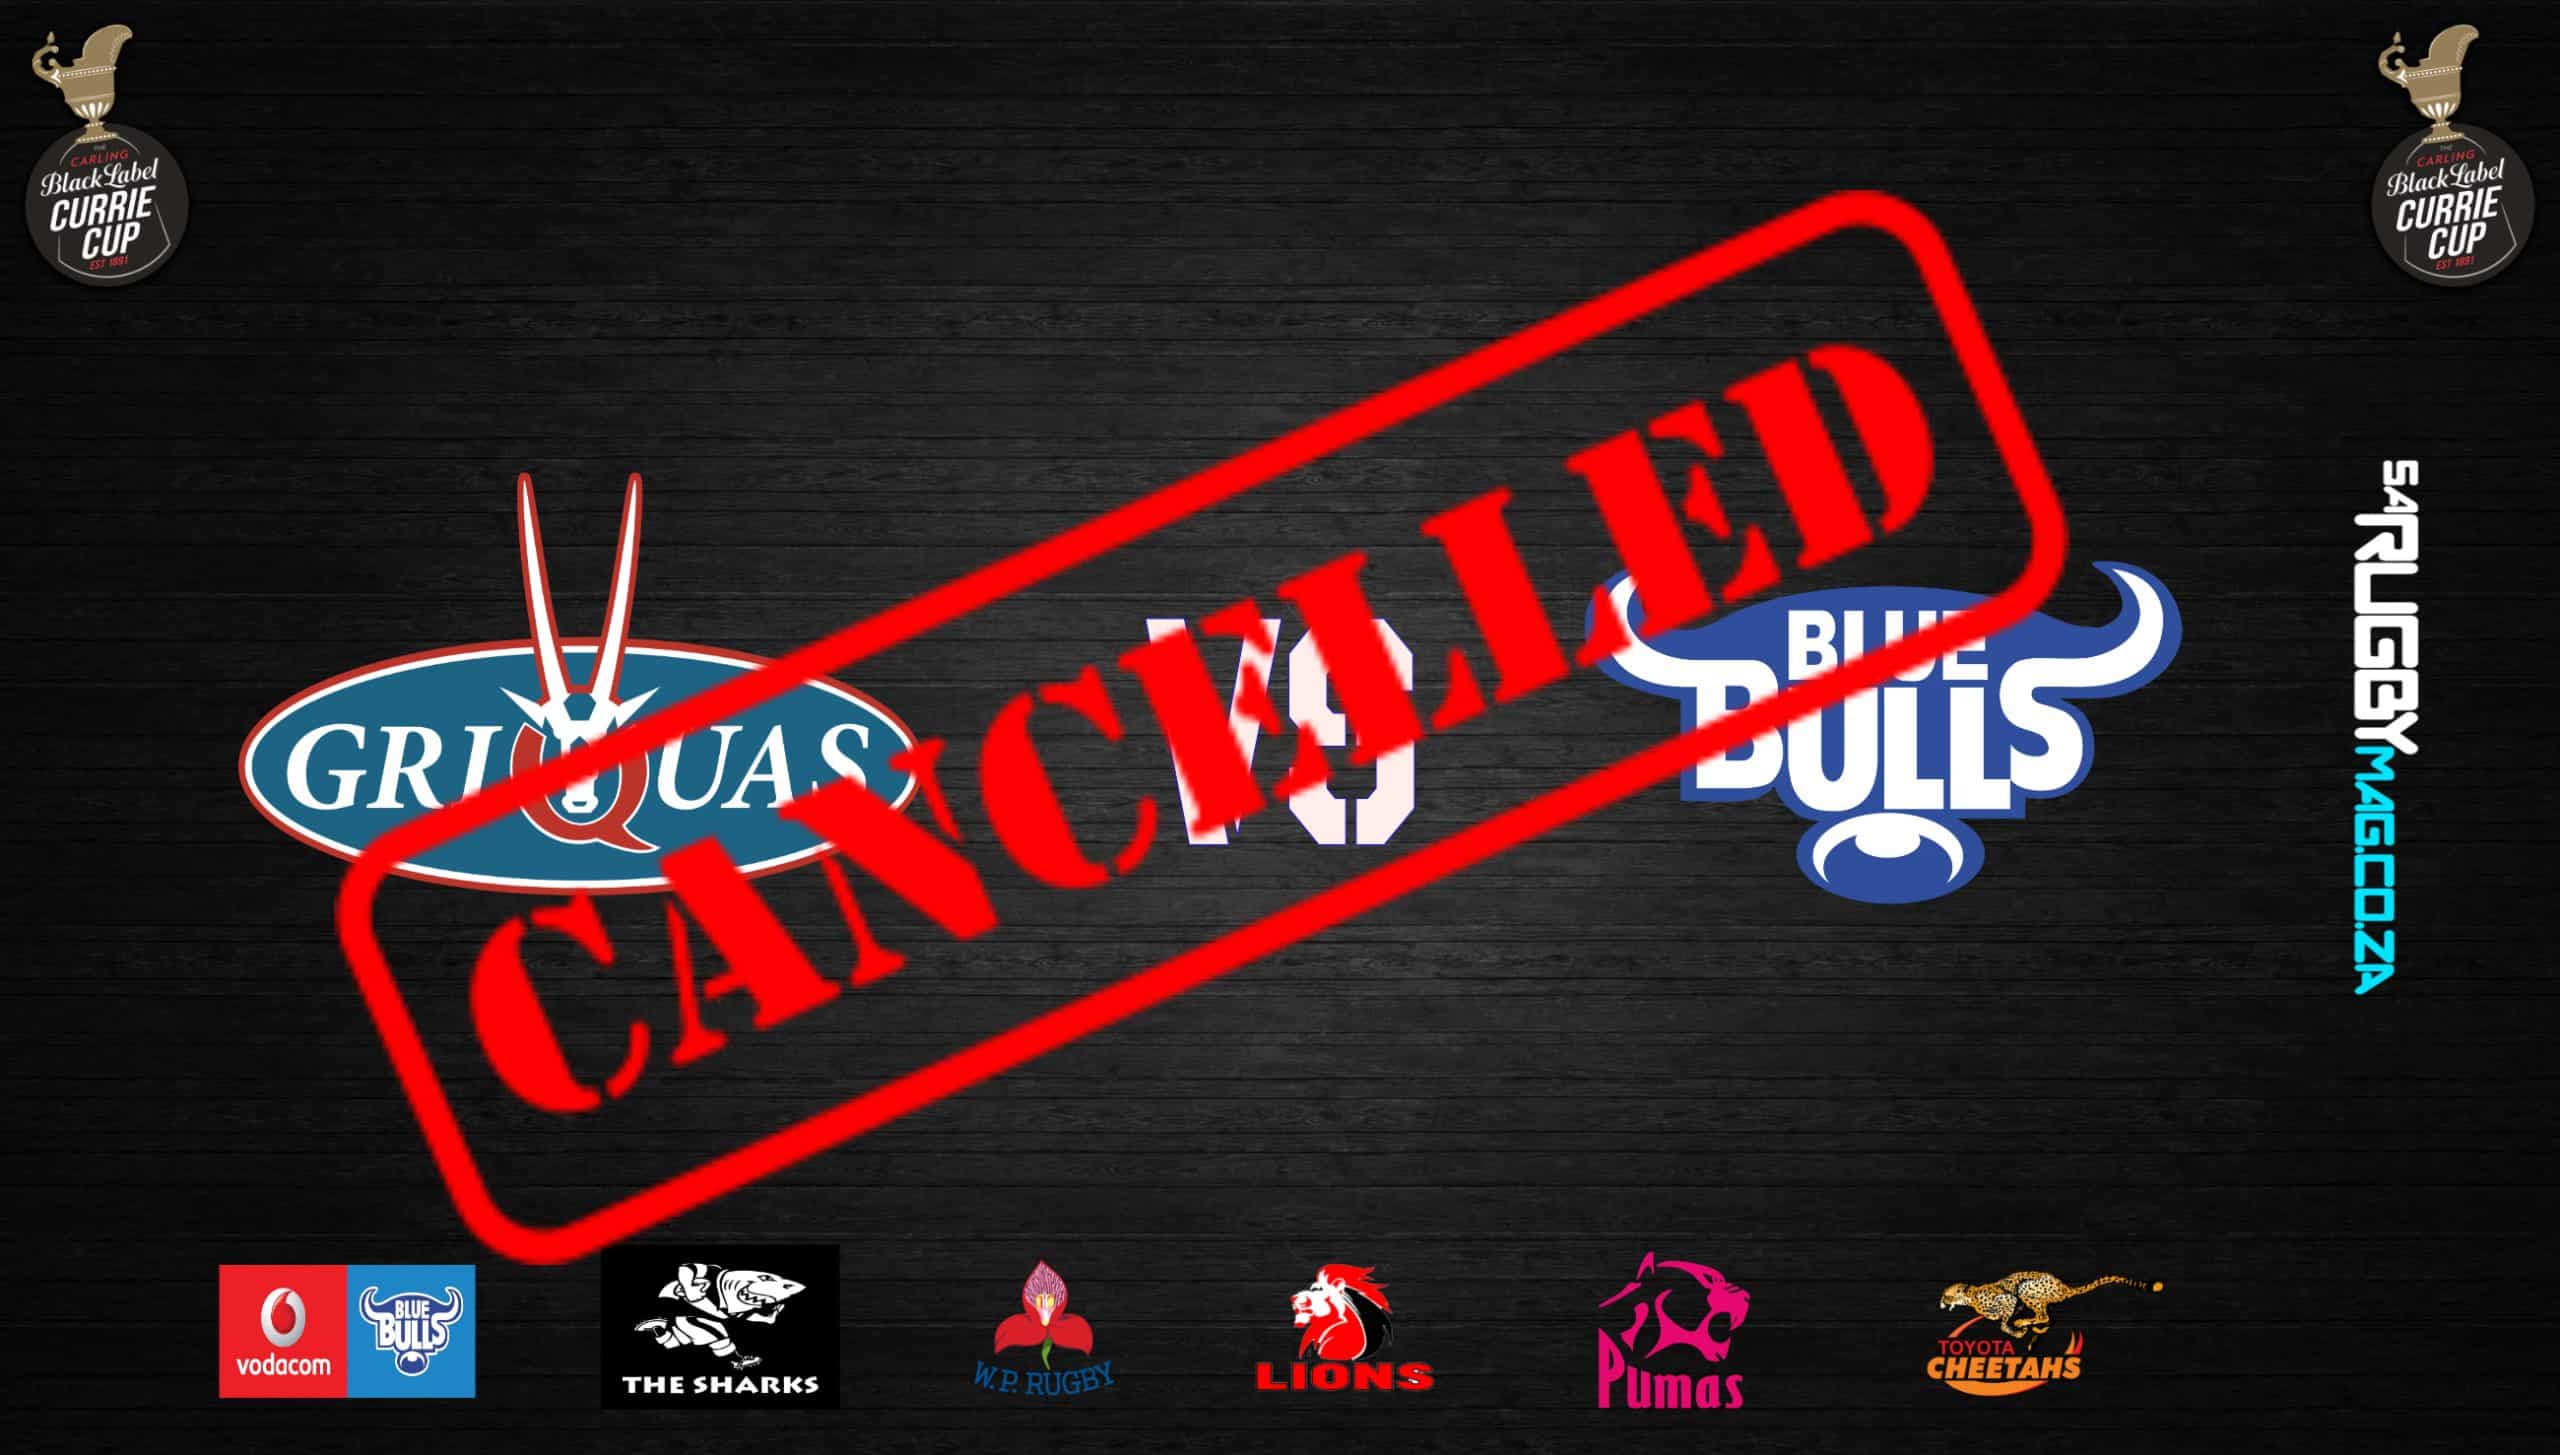 You are currently viewing Griquas vs Bulls match cancelled